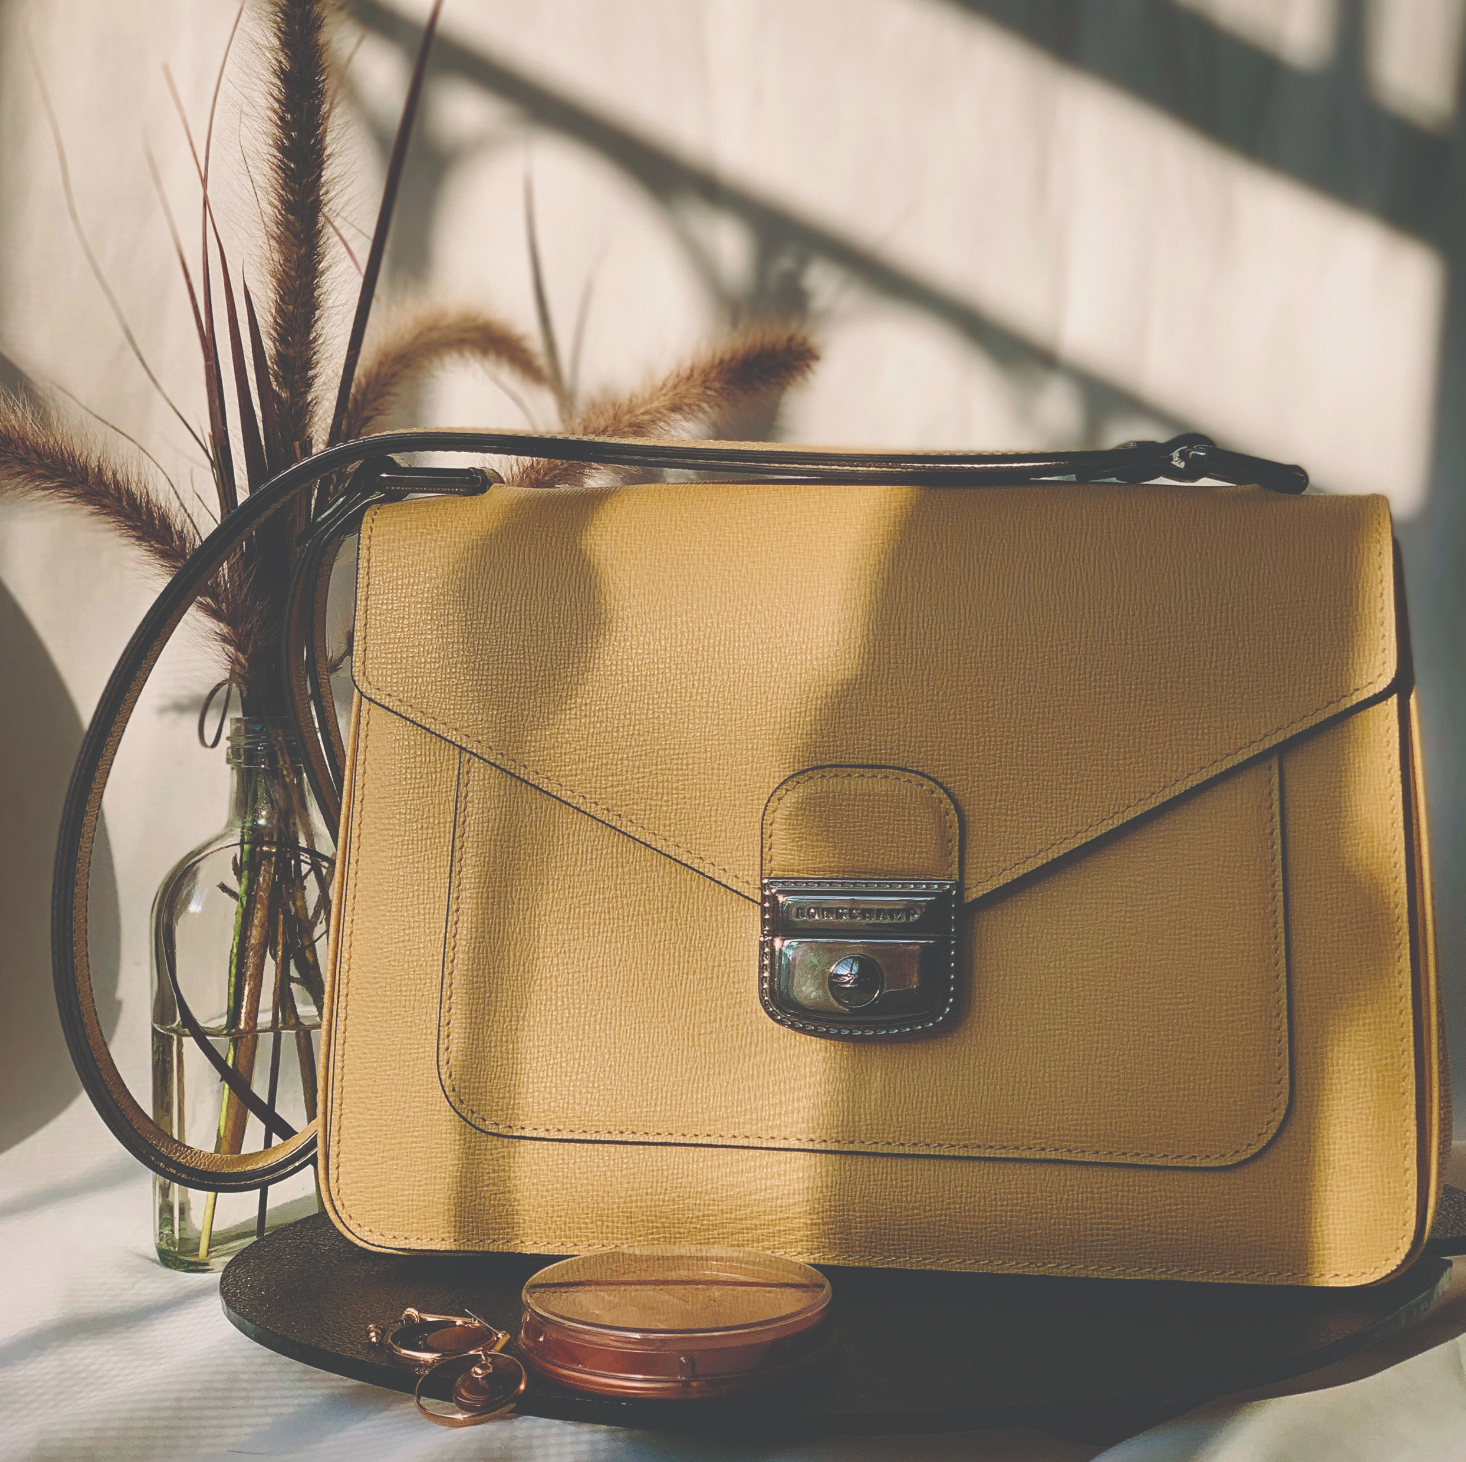 The Sustainability of Pre-loved Handbags and Where to Buy Your Own